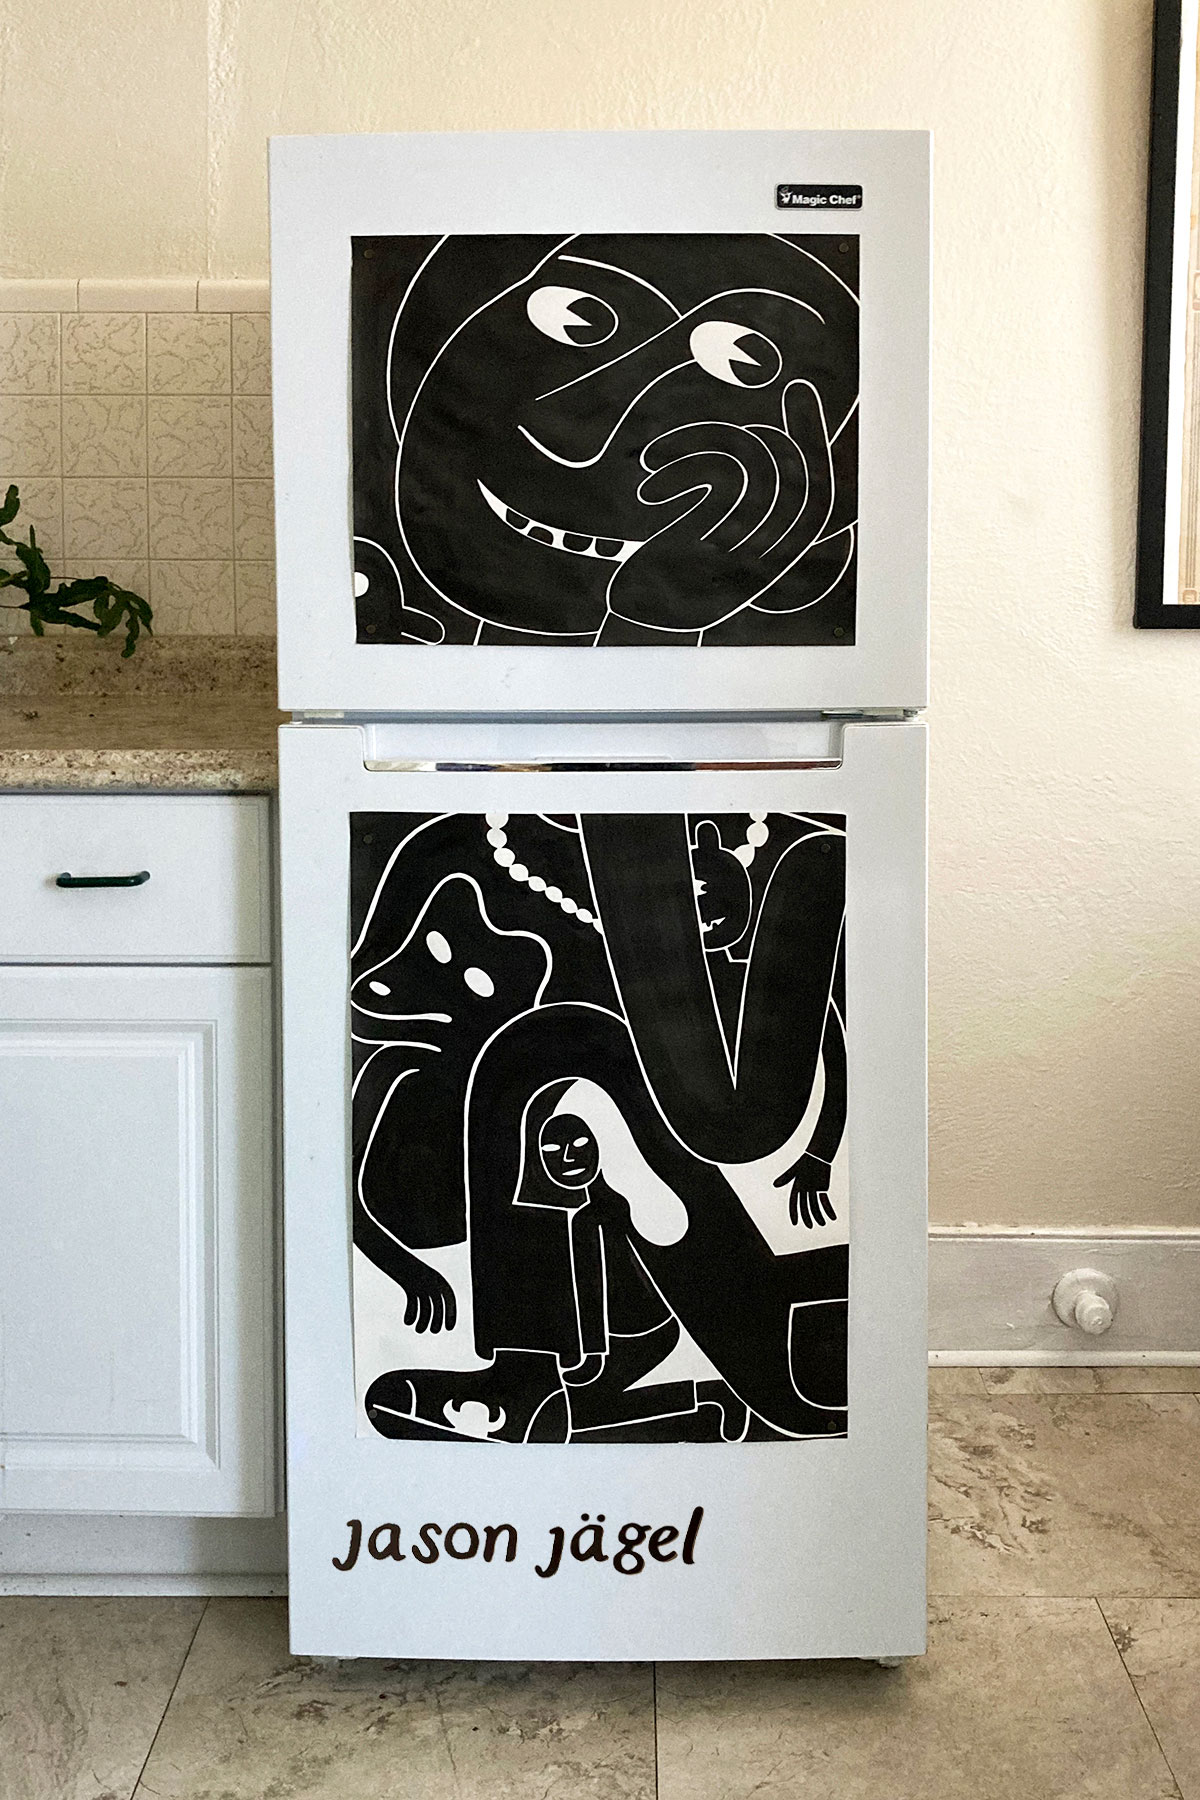 Two black and white drawings on a fridge